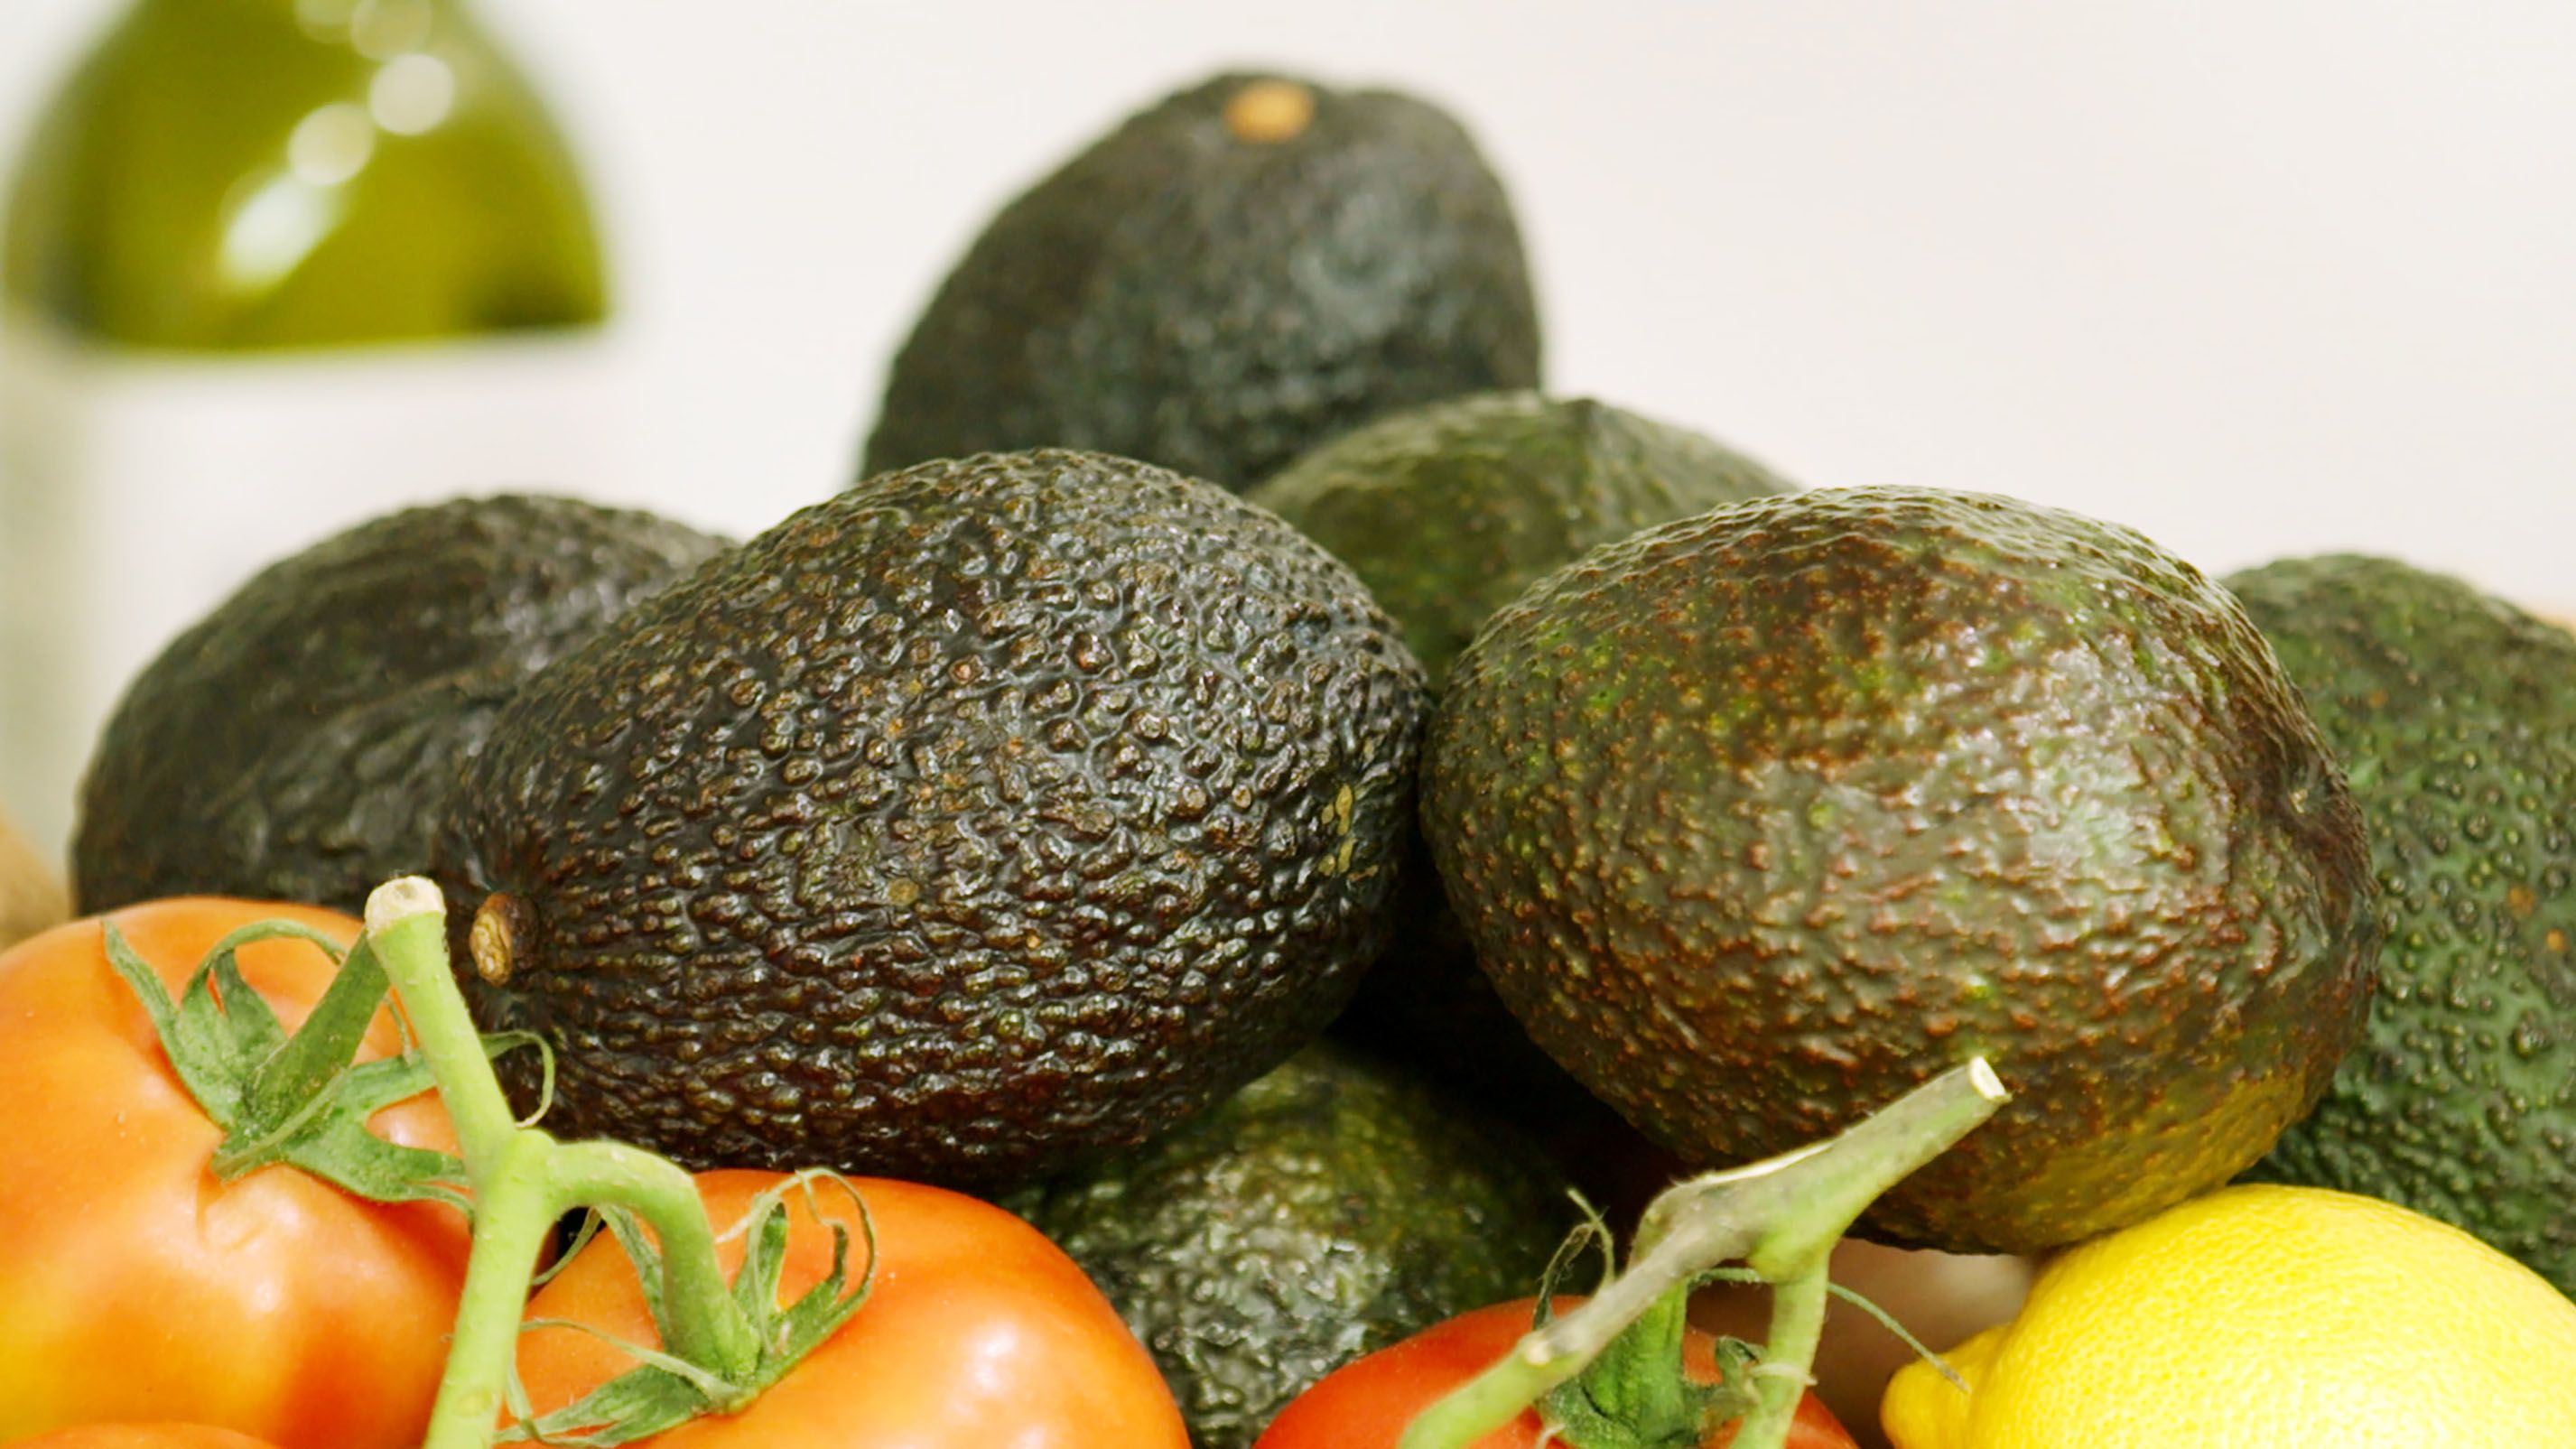 How to Tell If an Avocado Is Ripe (and How to Store It)